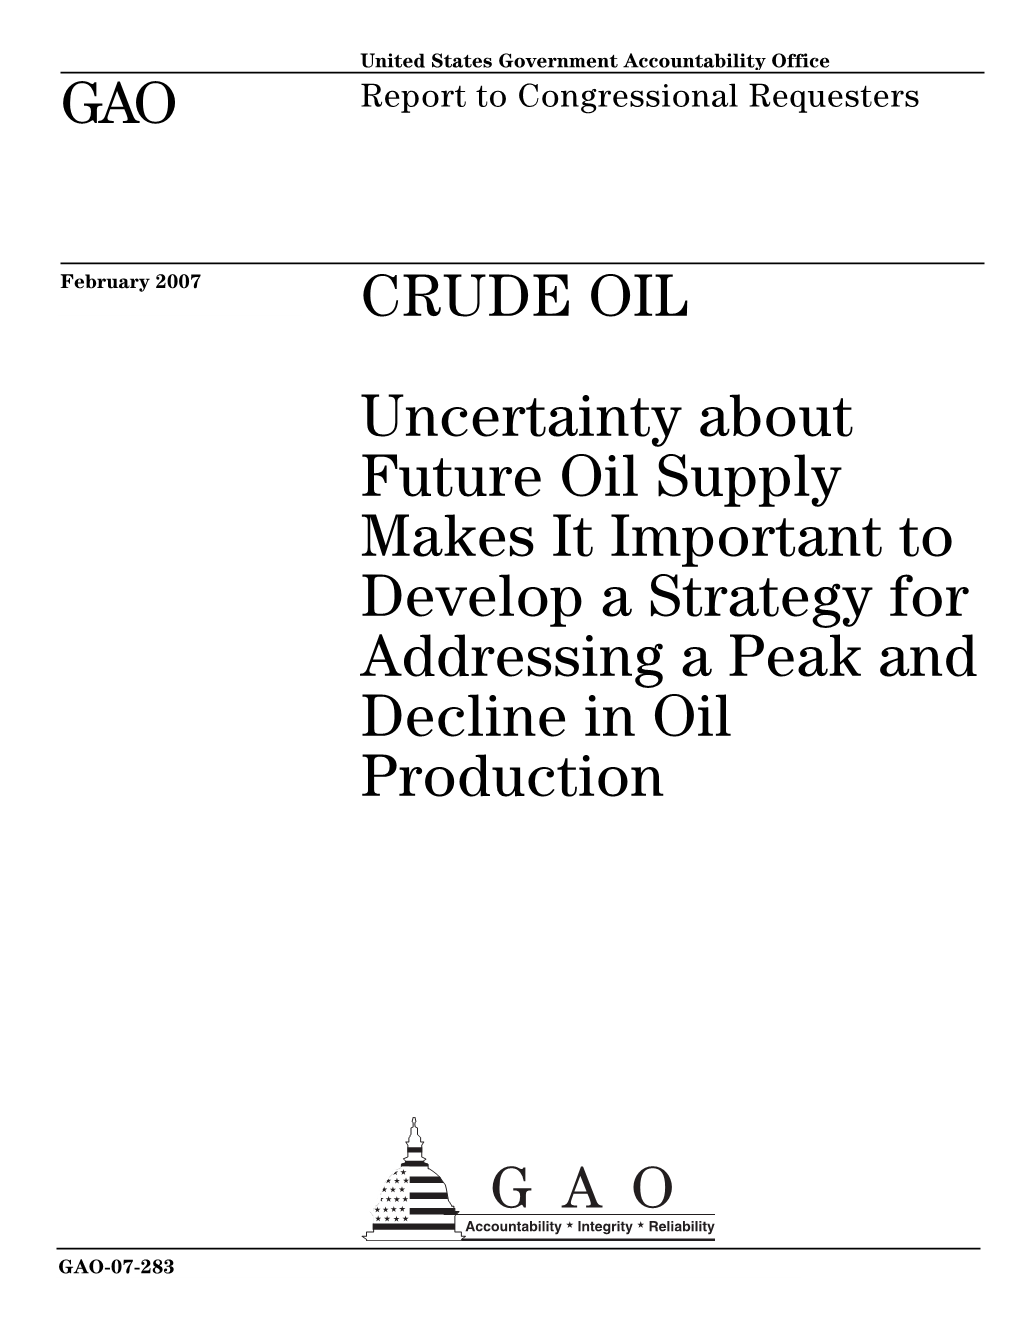 GAO-07-283 Crude Oil: Uncertainty About Future Oil Supply Makes It